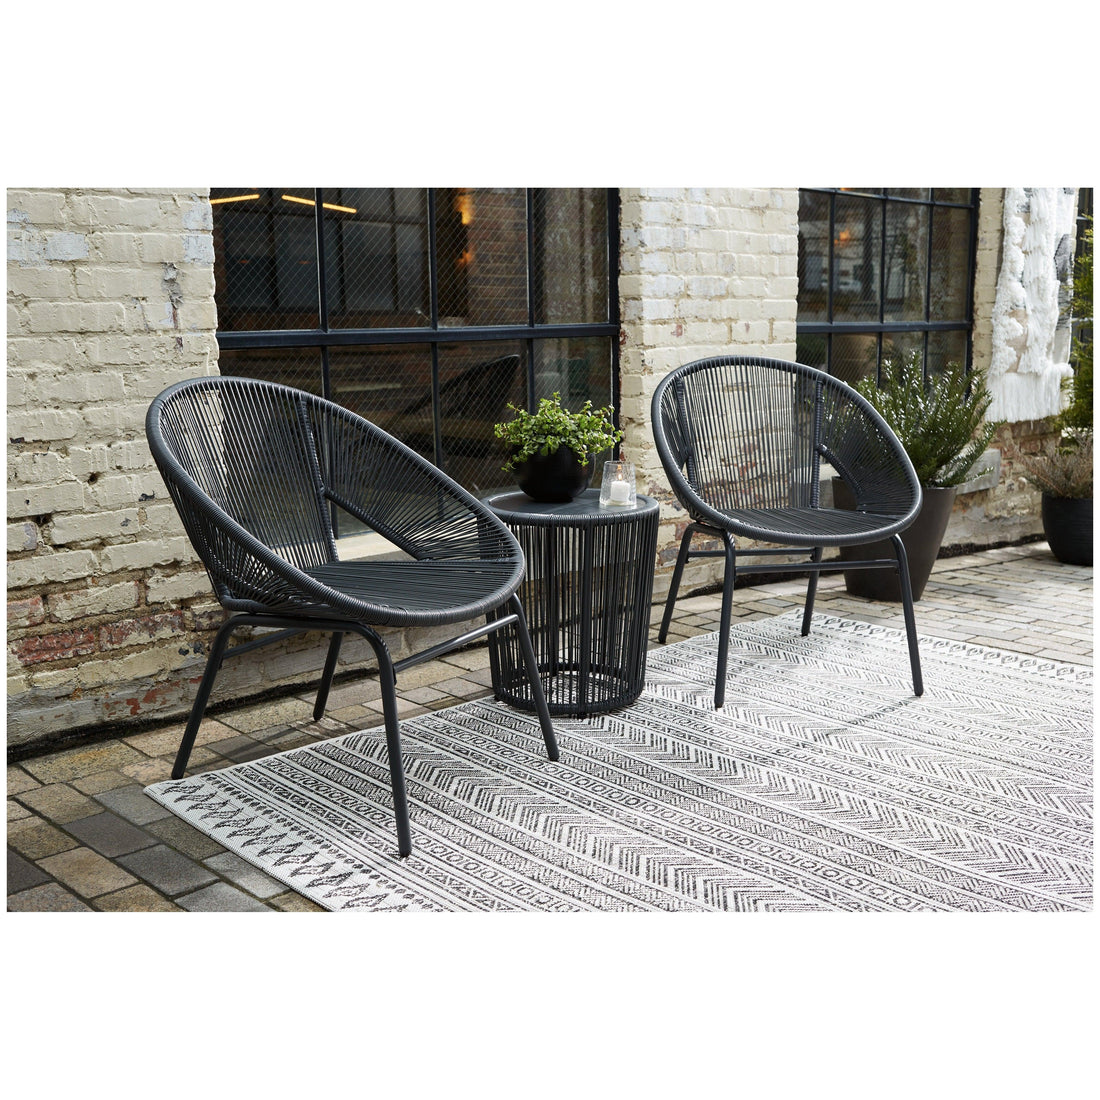 Mandarin Cape Outdoor Table and Chairs (Set of 3) Ash-P312-049